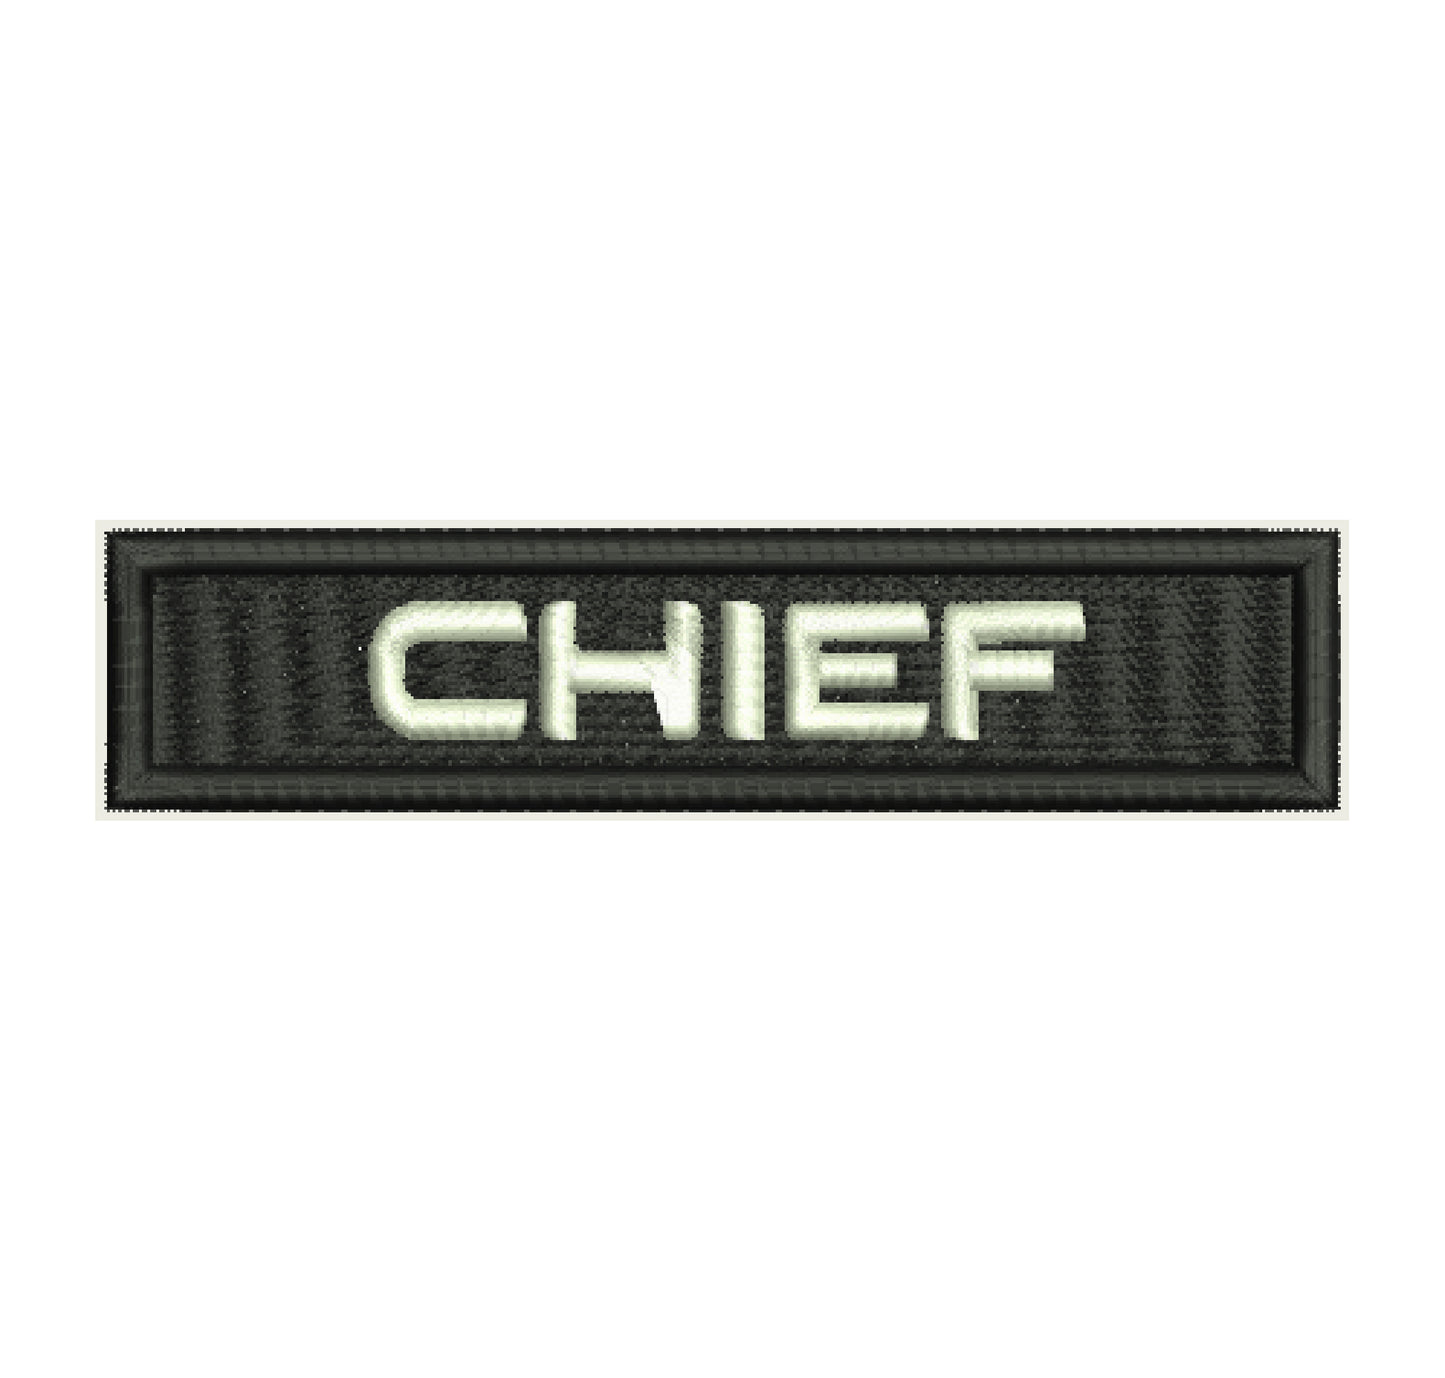 Chief Patch